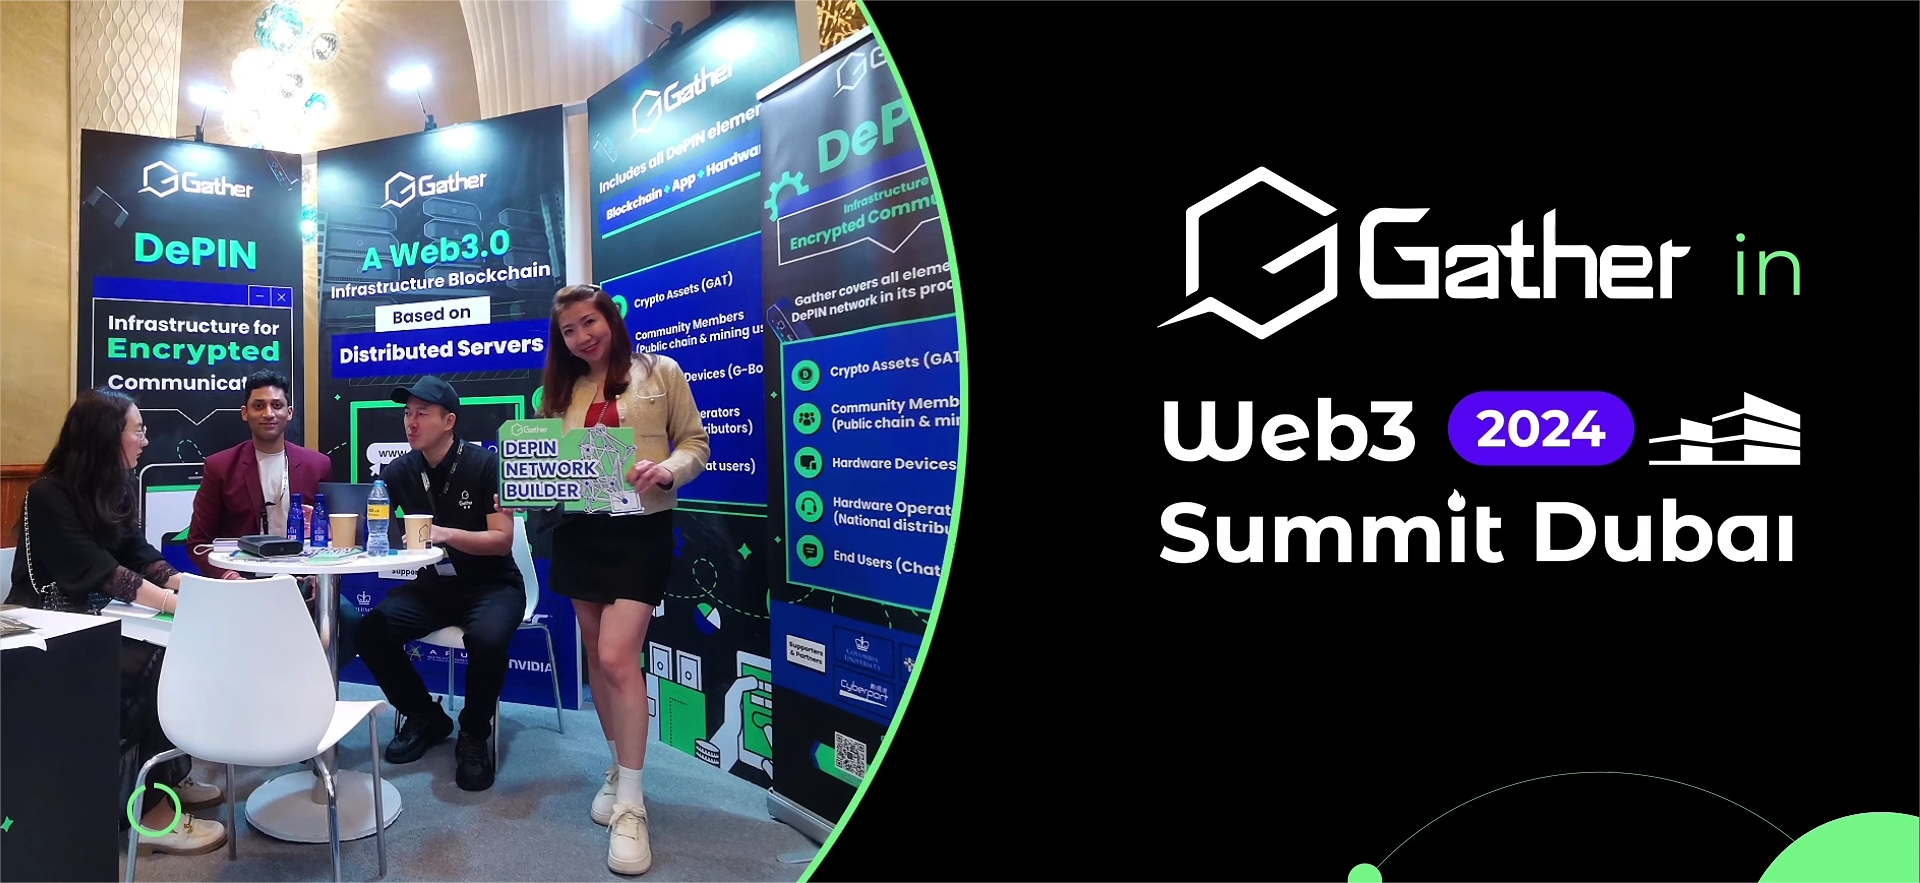 Gather attended the Dubai Web3 Summit and embarked on the path of globalization development